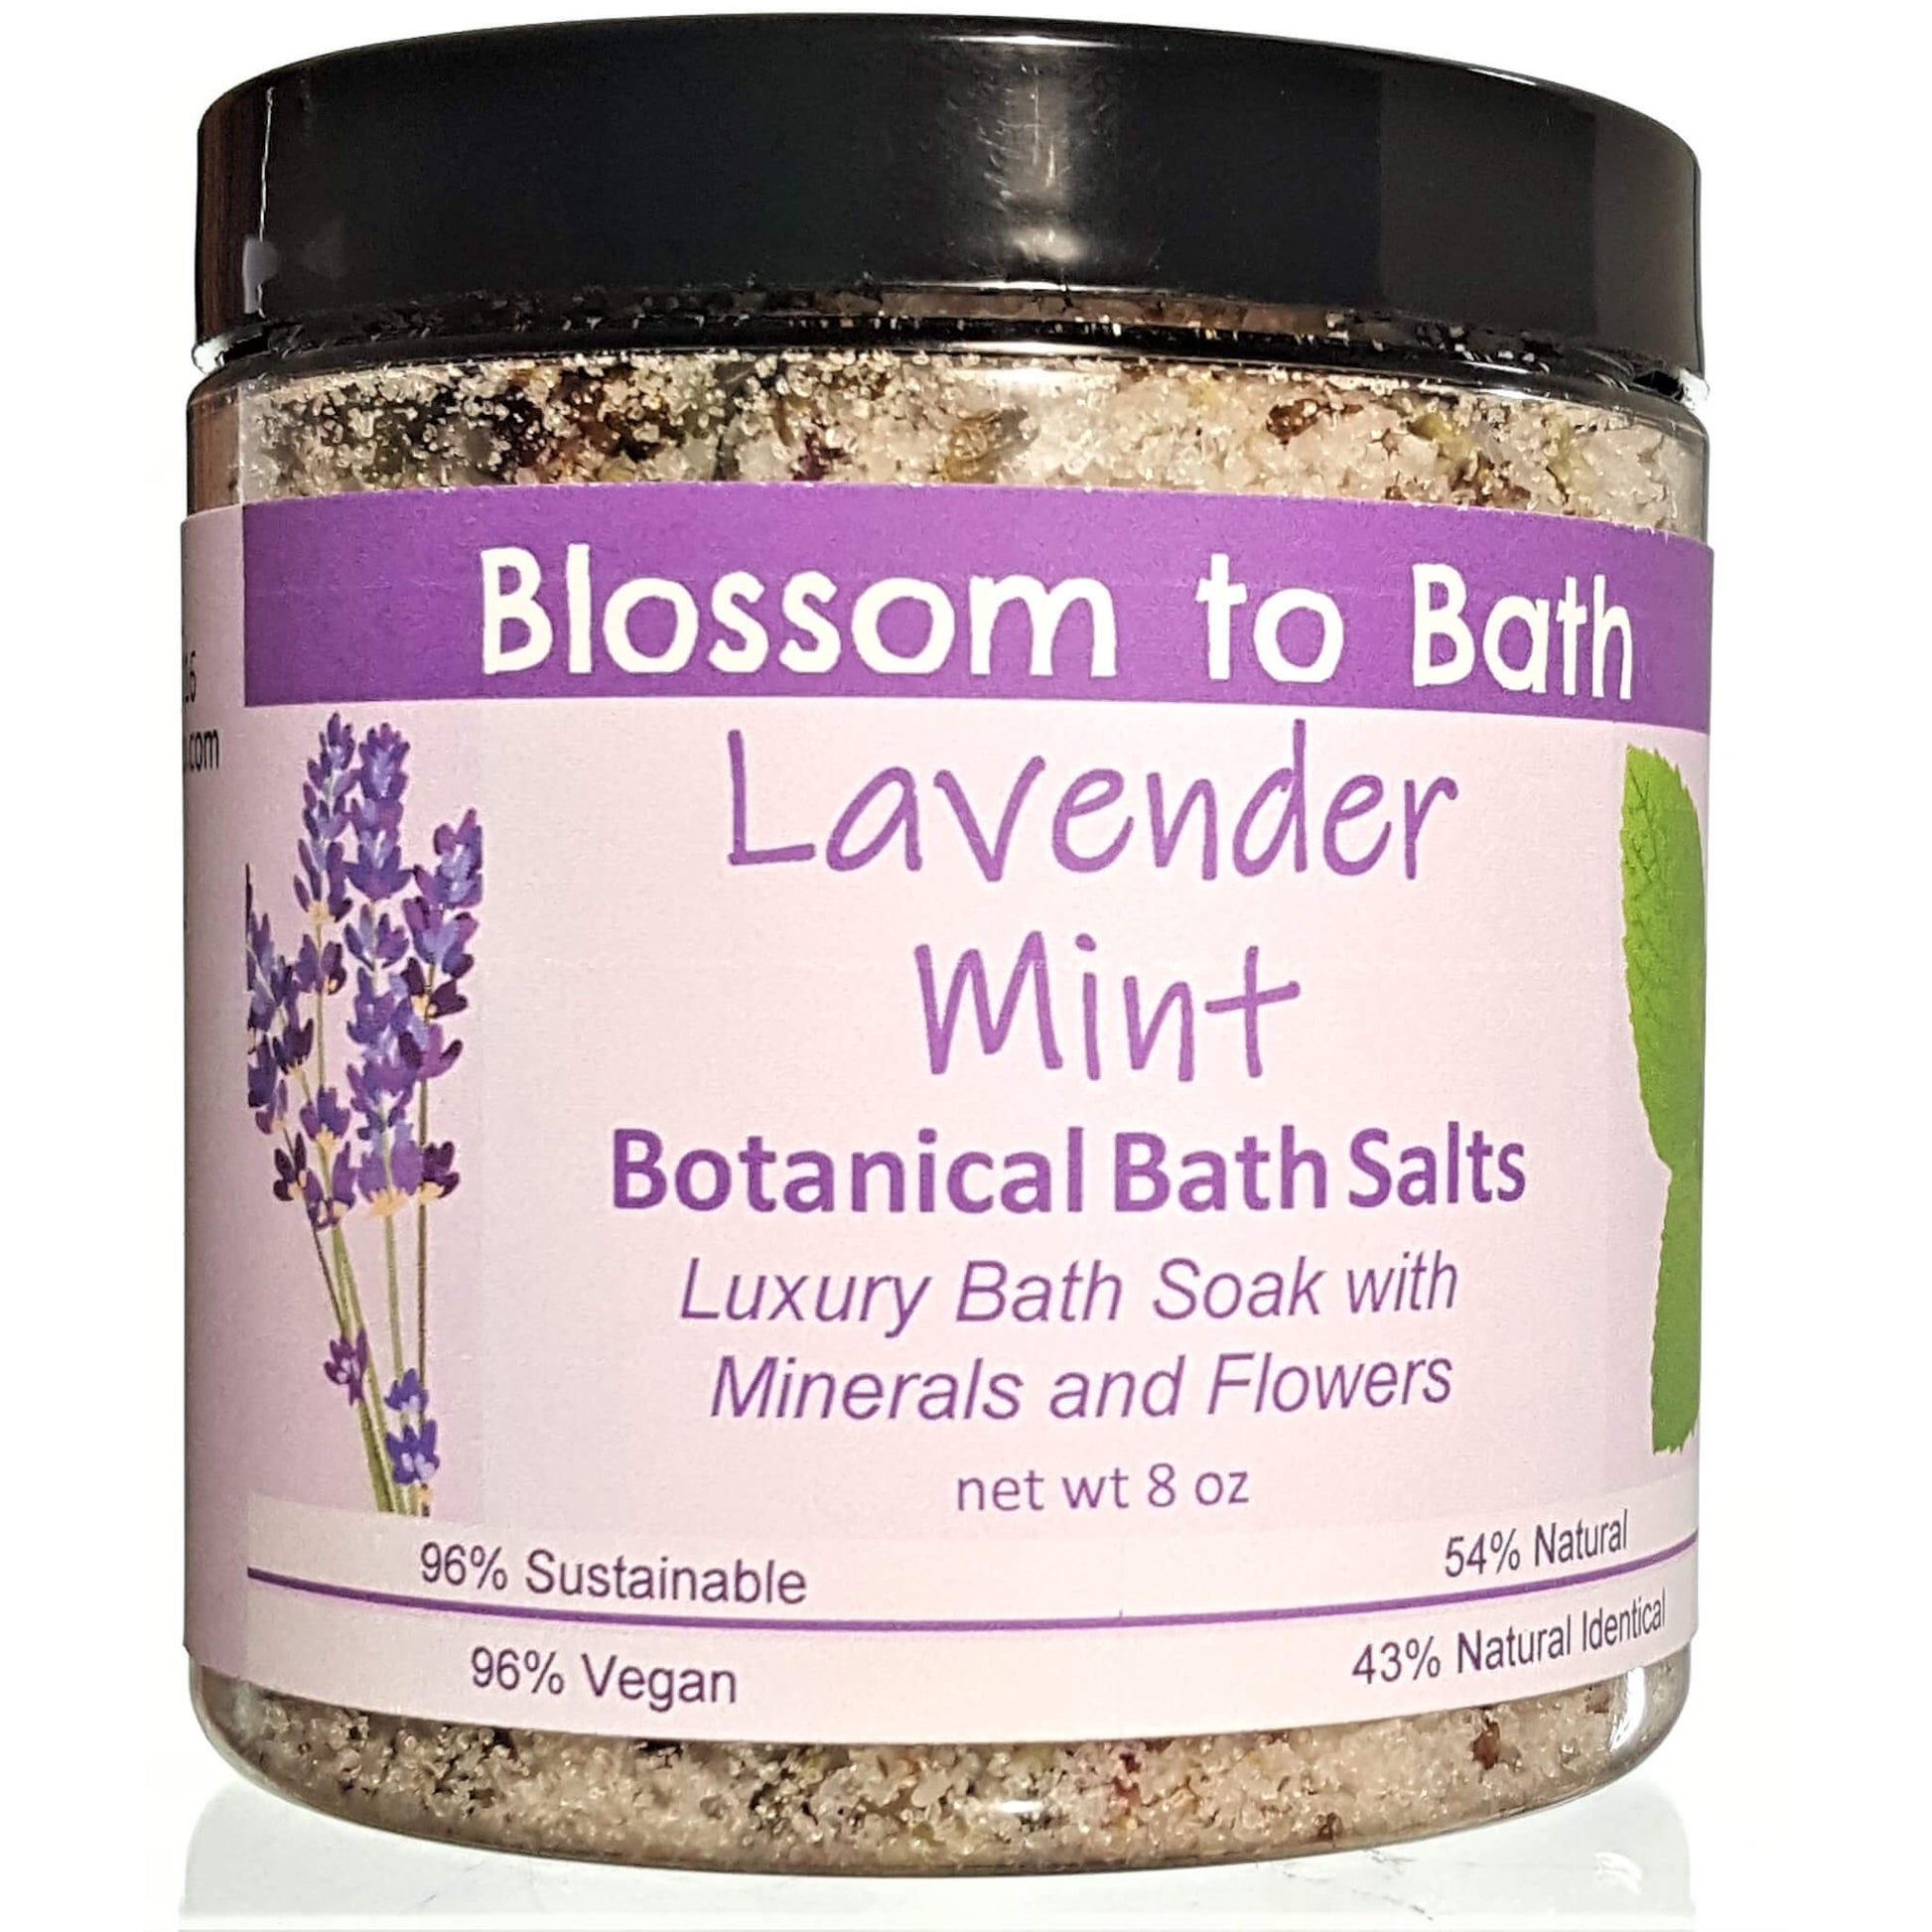 Buy Blossom to Bath Lavender Mint Botanical Bath Salts from Flowersong Soap Studio.  A hand selected variety of skin loving botanicals and mineral rich salts for a unique, luxurious soaking experience  A cheerfully relaxing combination of lavender and peppermint.